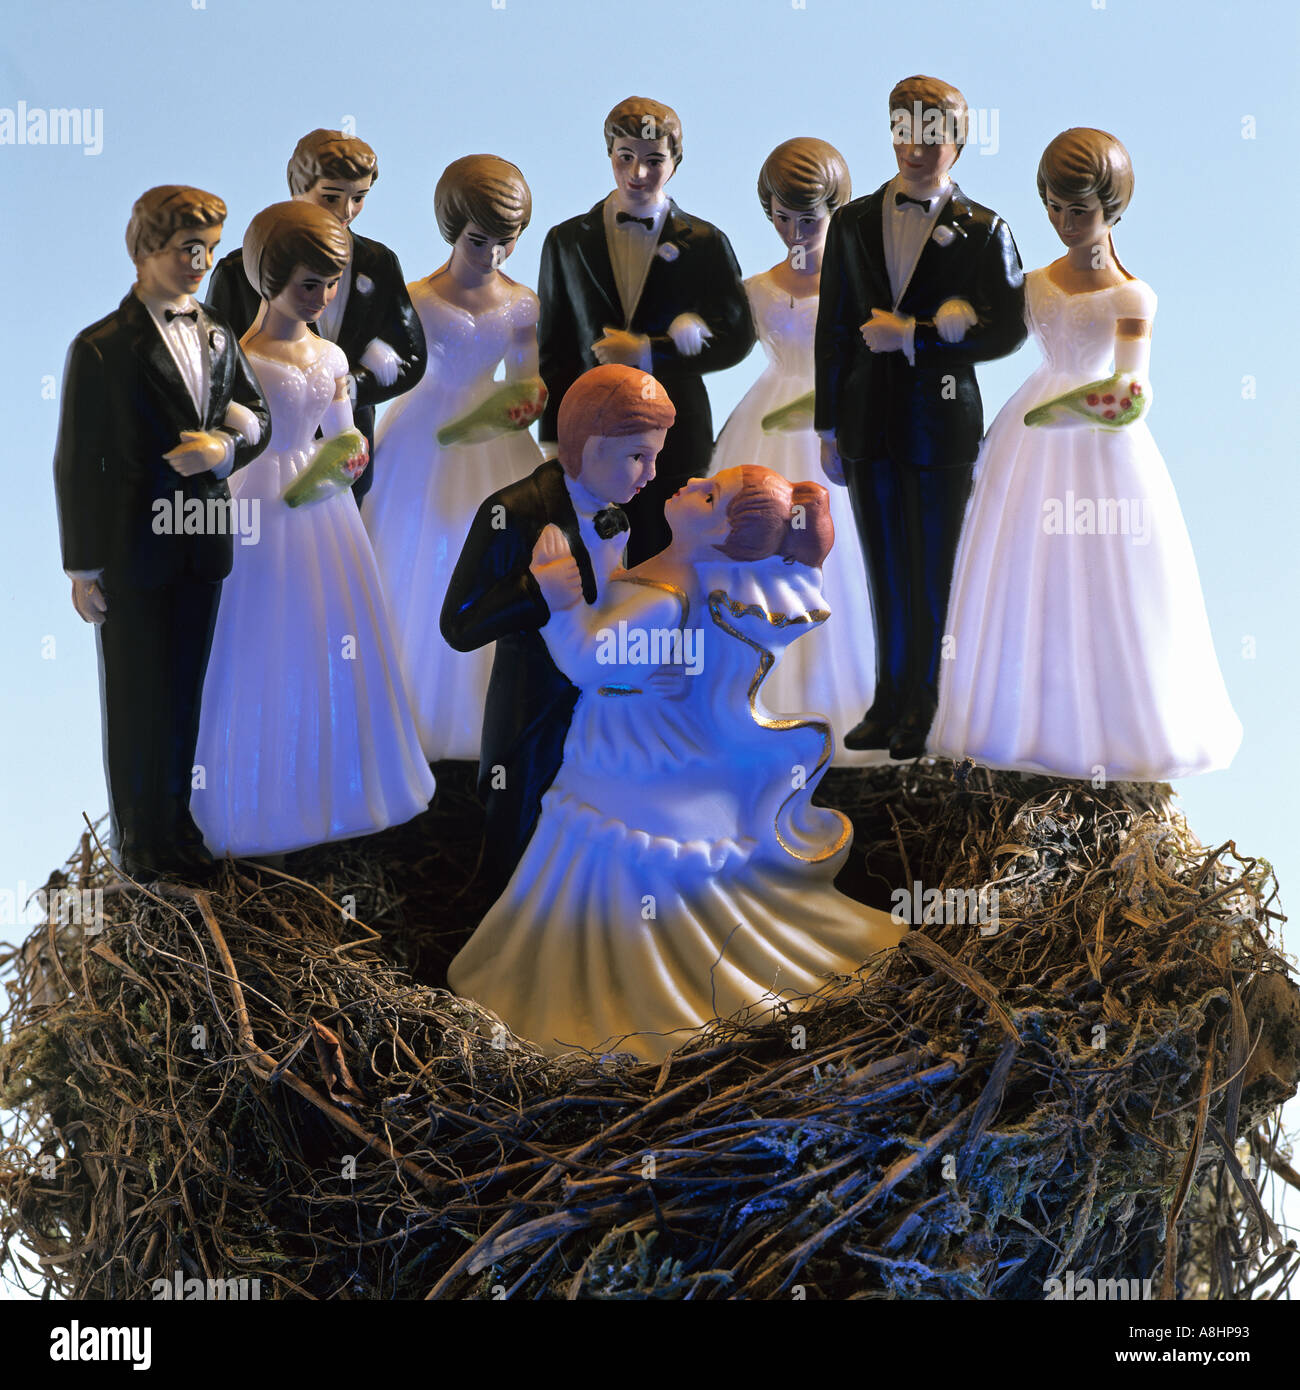 BRIDE AND GROOM FIGURINES DANCING IN A BLACKBIRD NEST AND 4 COUPLES AROUND Stock Photo